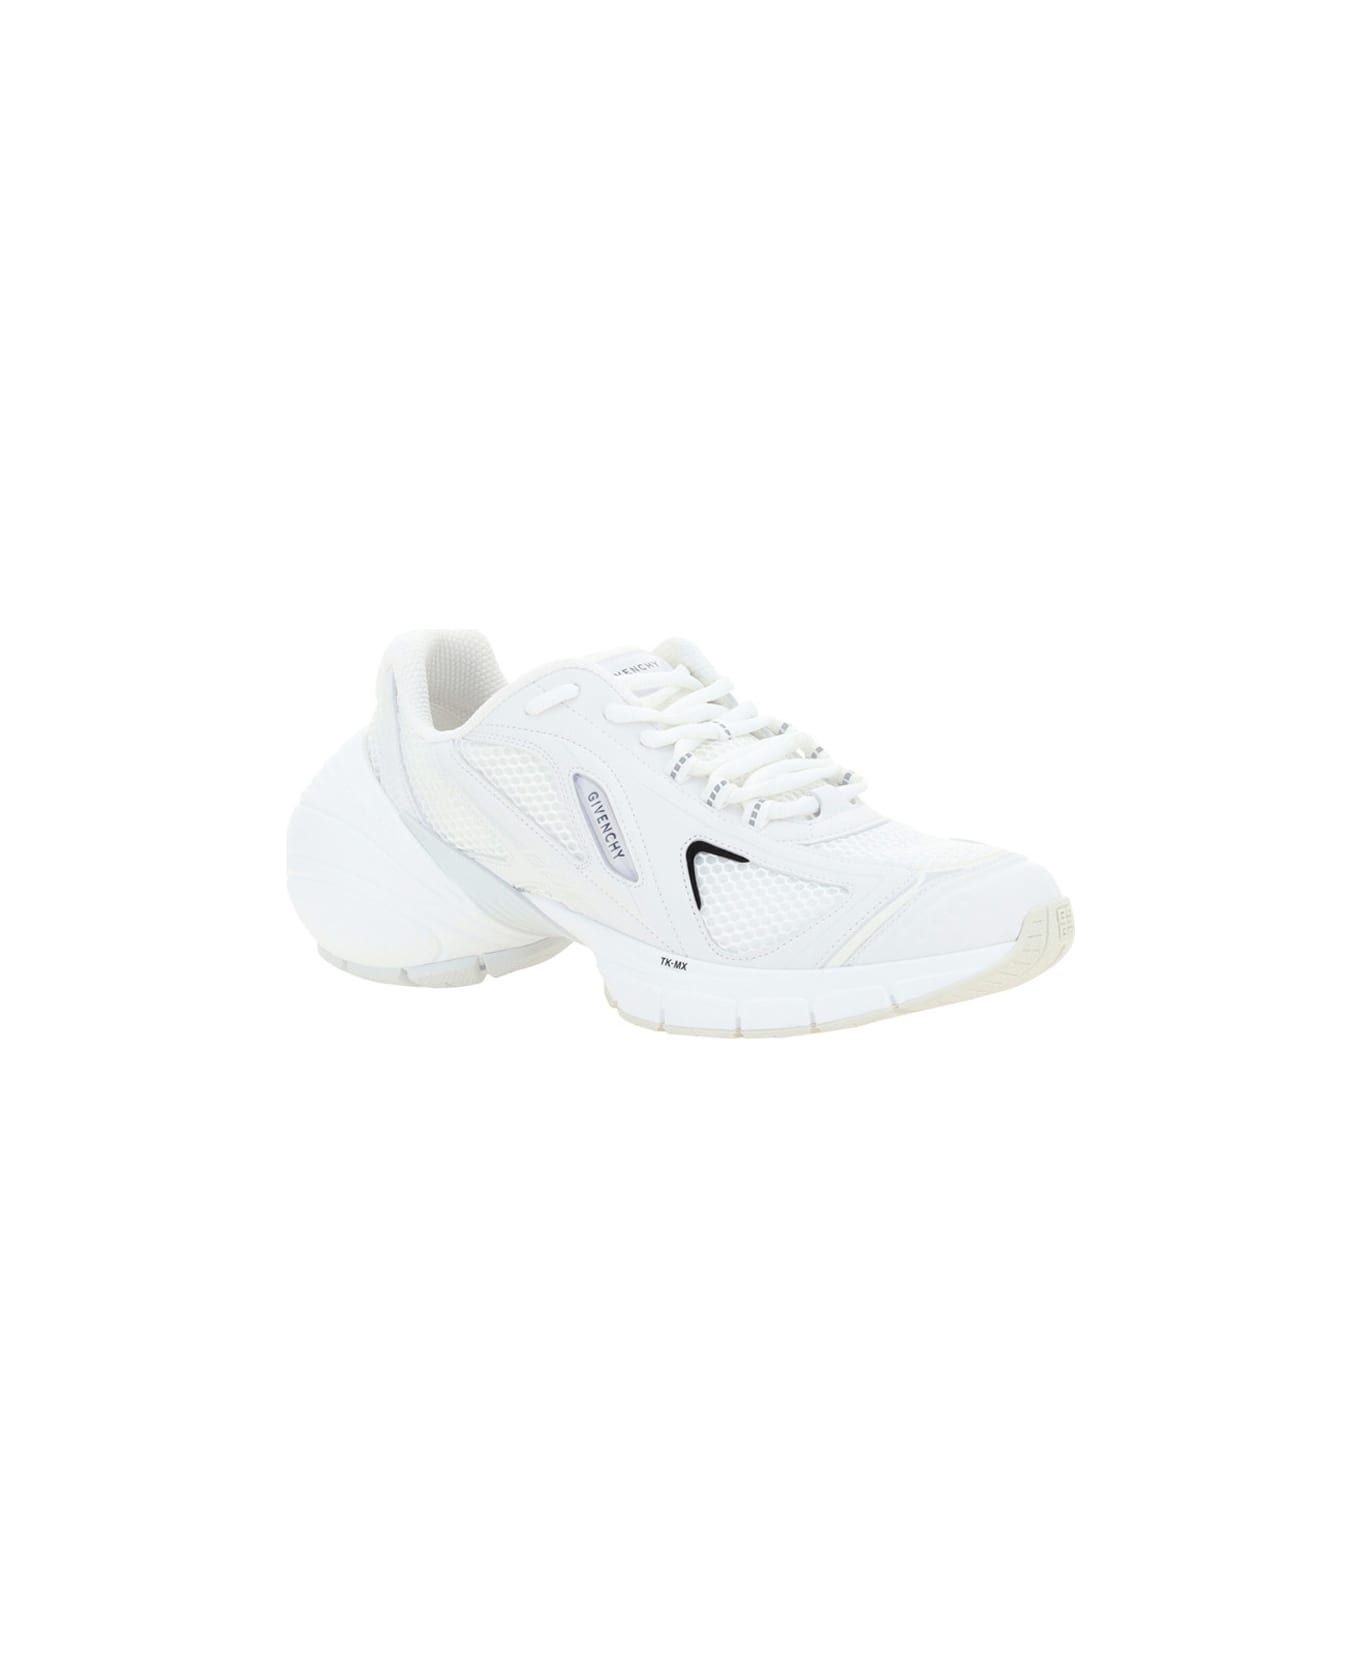 Givenchy Tk-mx Runner Sneakers